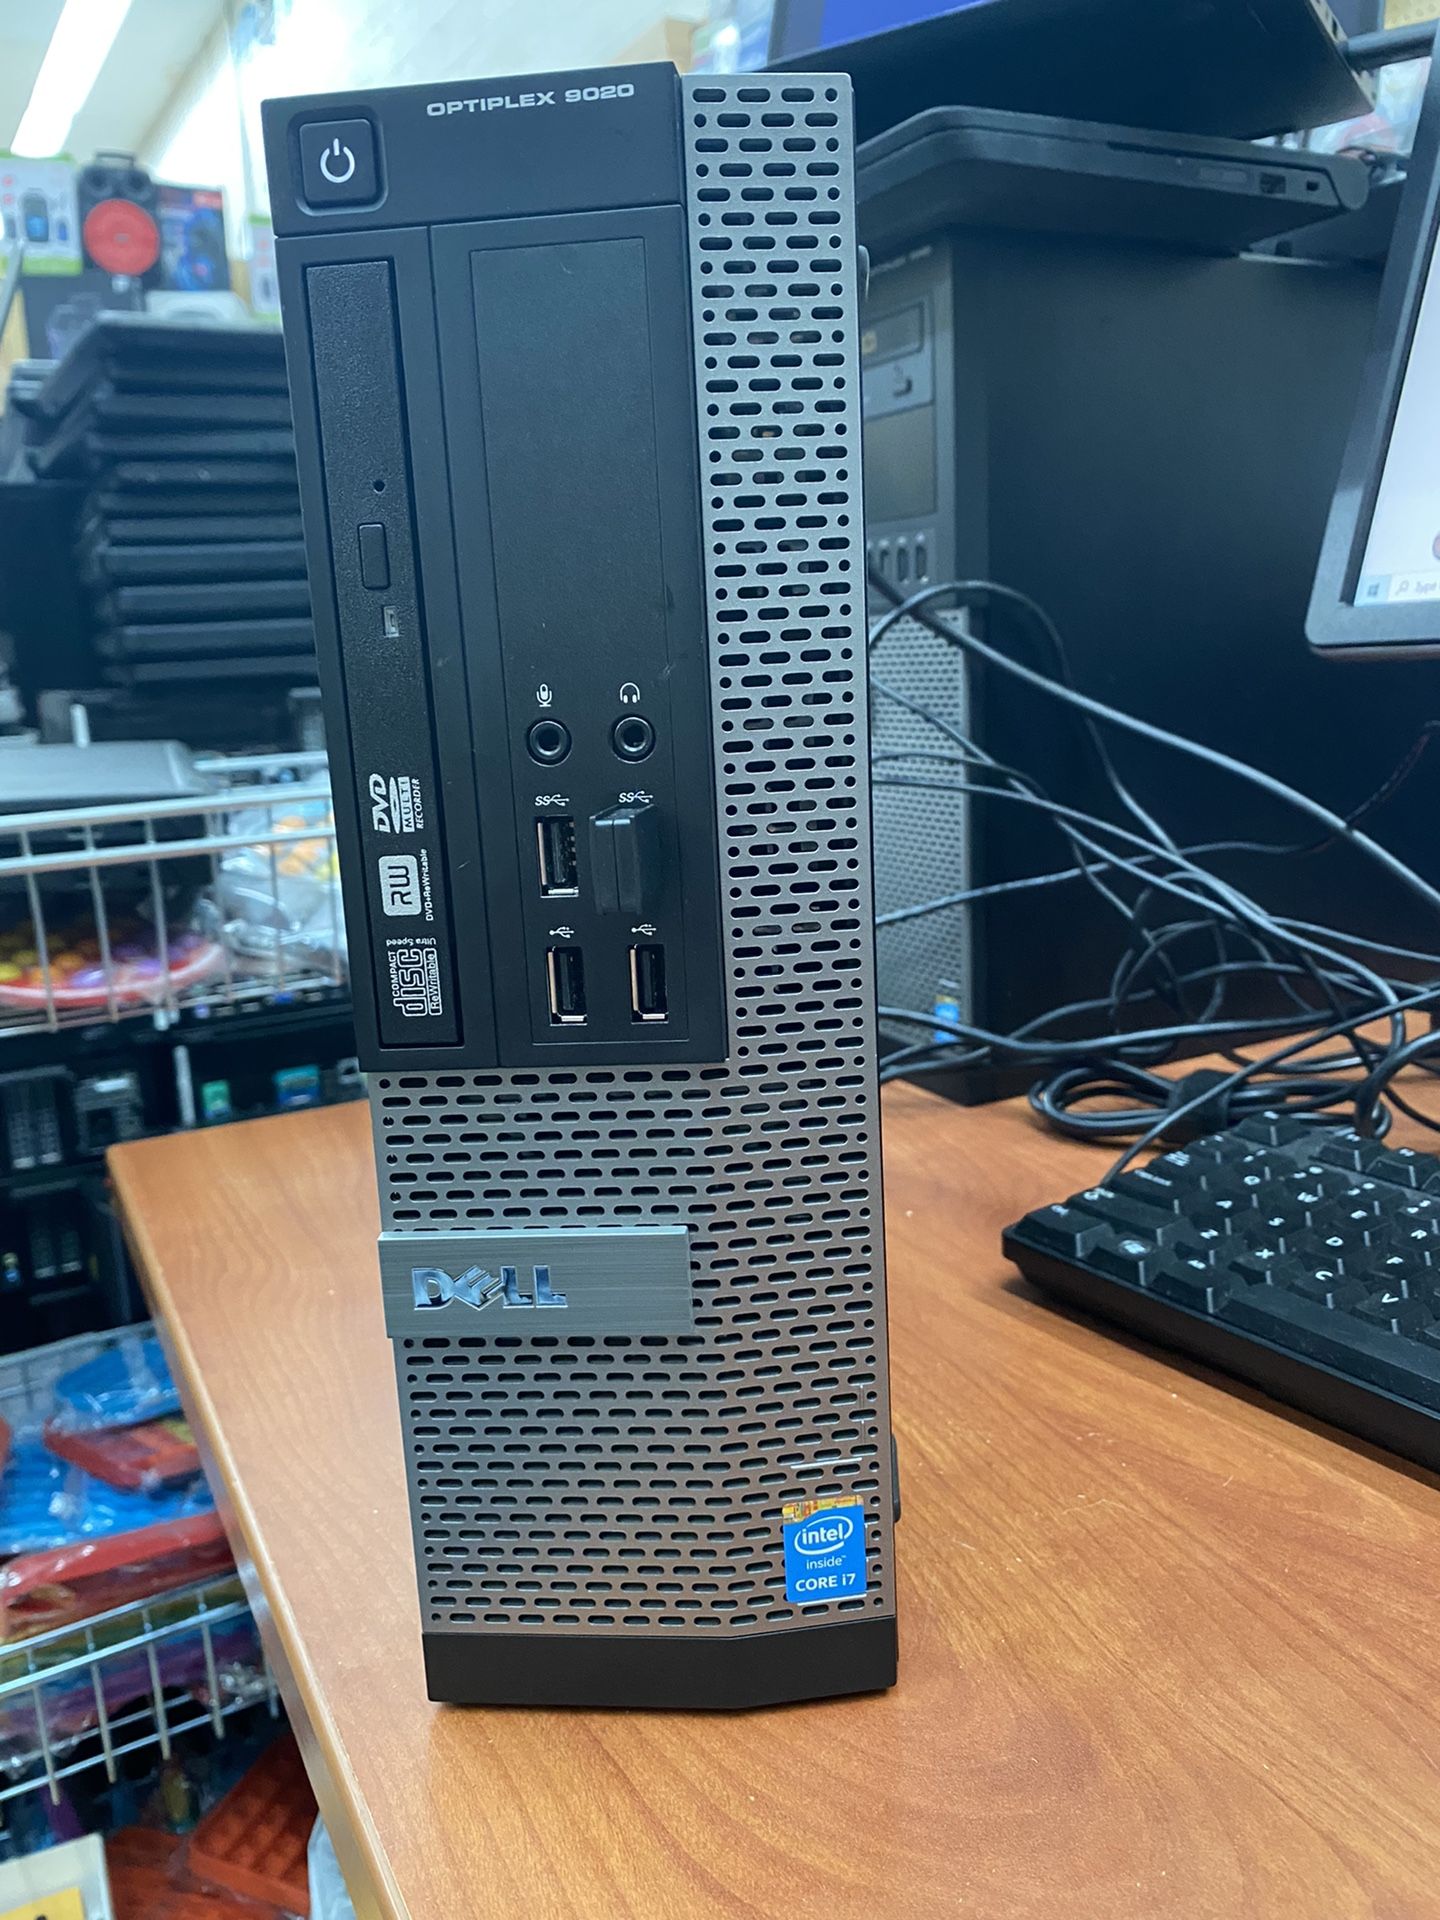 Dell Optiplex 9020 SFF, Intel Core i7, 8gb ram, Windows 10 Pro, USB wifi adapter, 500gb HDD, come with power cable.   Only the PC ( Tower) a power cab